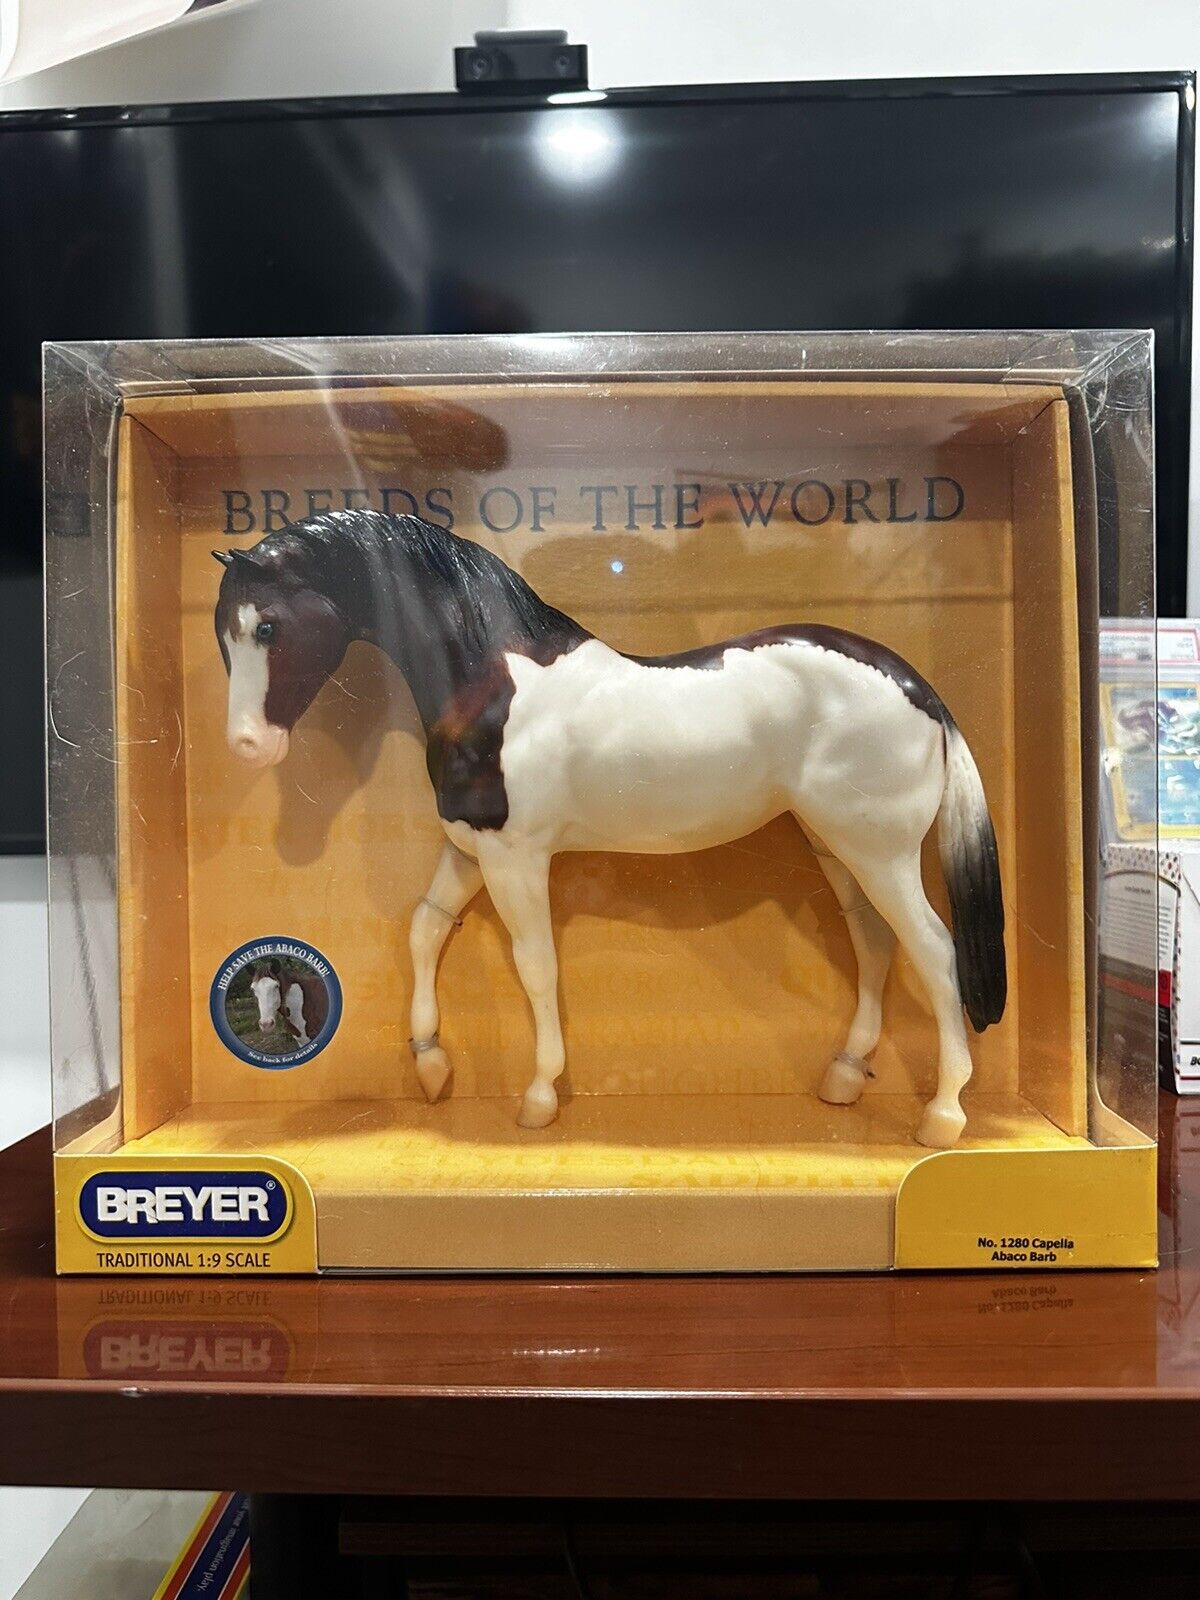 Breyer Horse Breeds of the World No. 1280 Capella Abaco Barb BOXED NEW